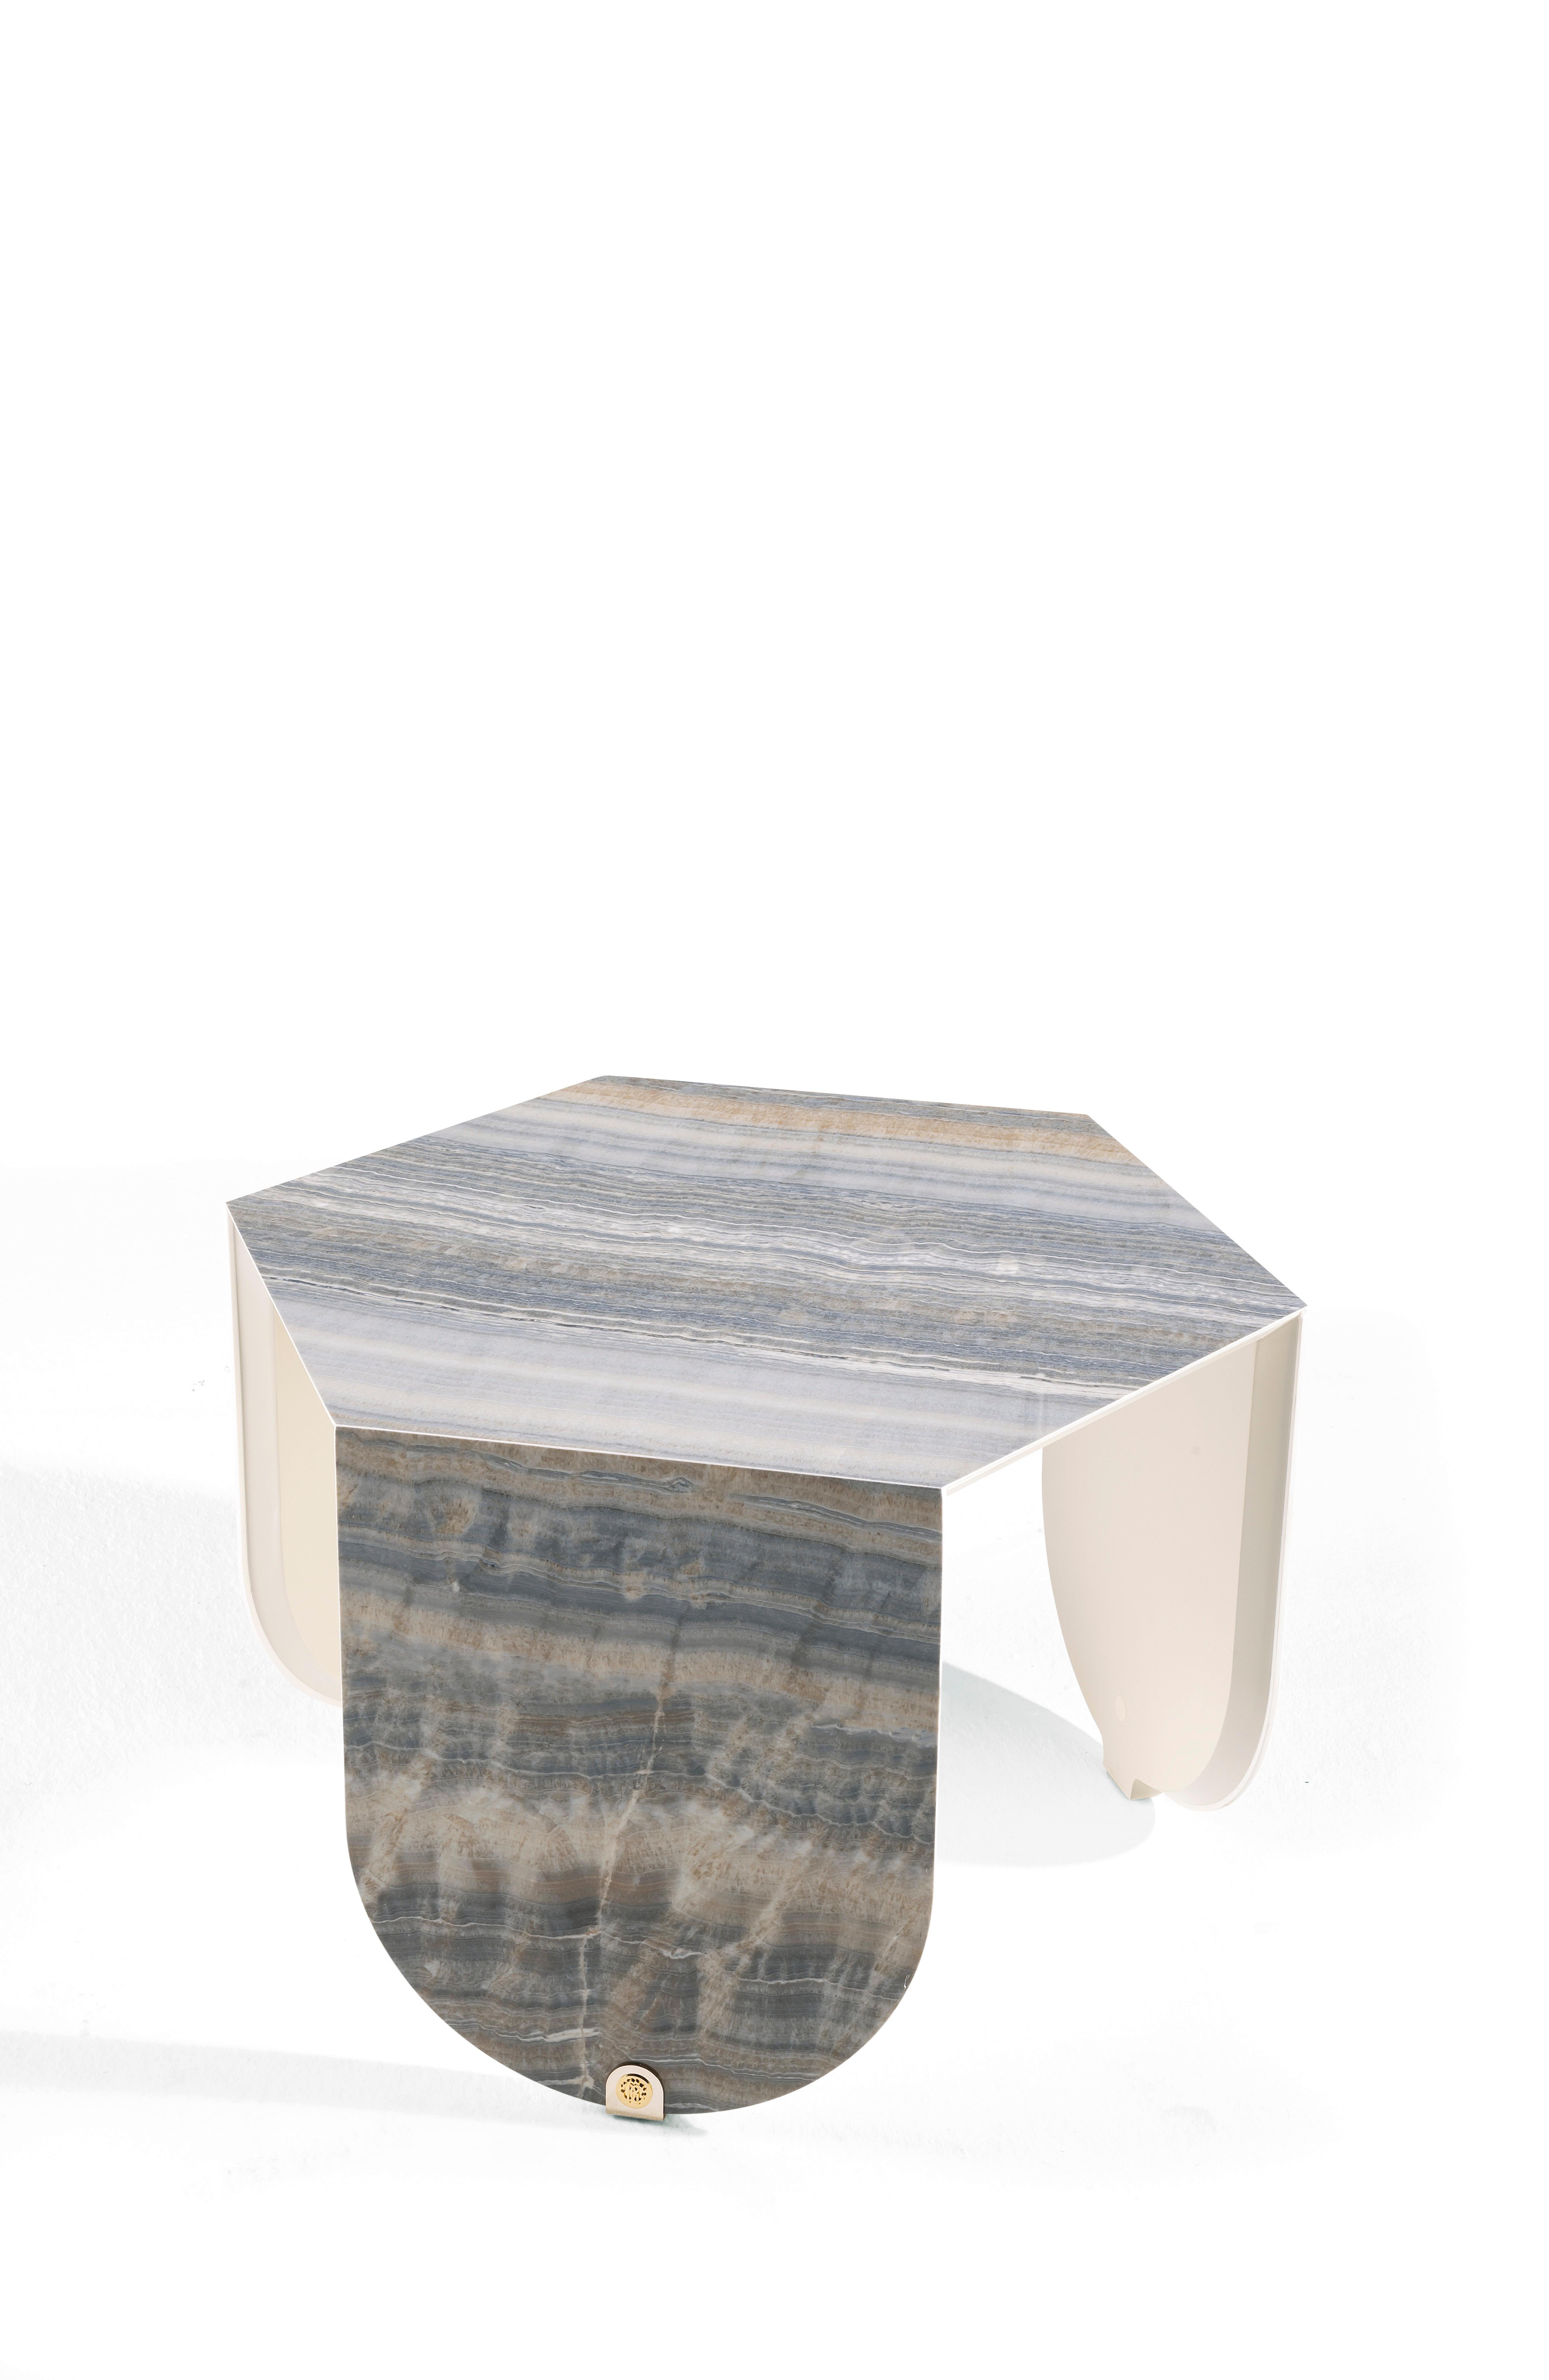 Modern 21st Century Inagua Side Table in Grey Gres by Roberto Cavalli Home Interiors For Sale